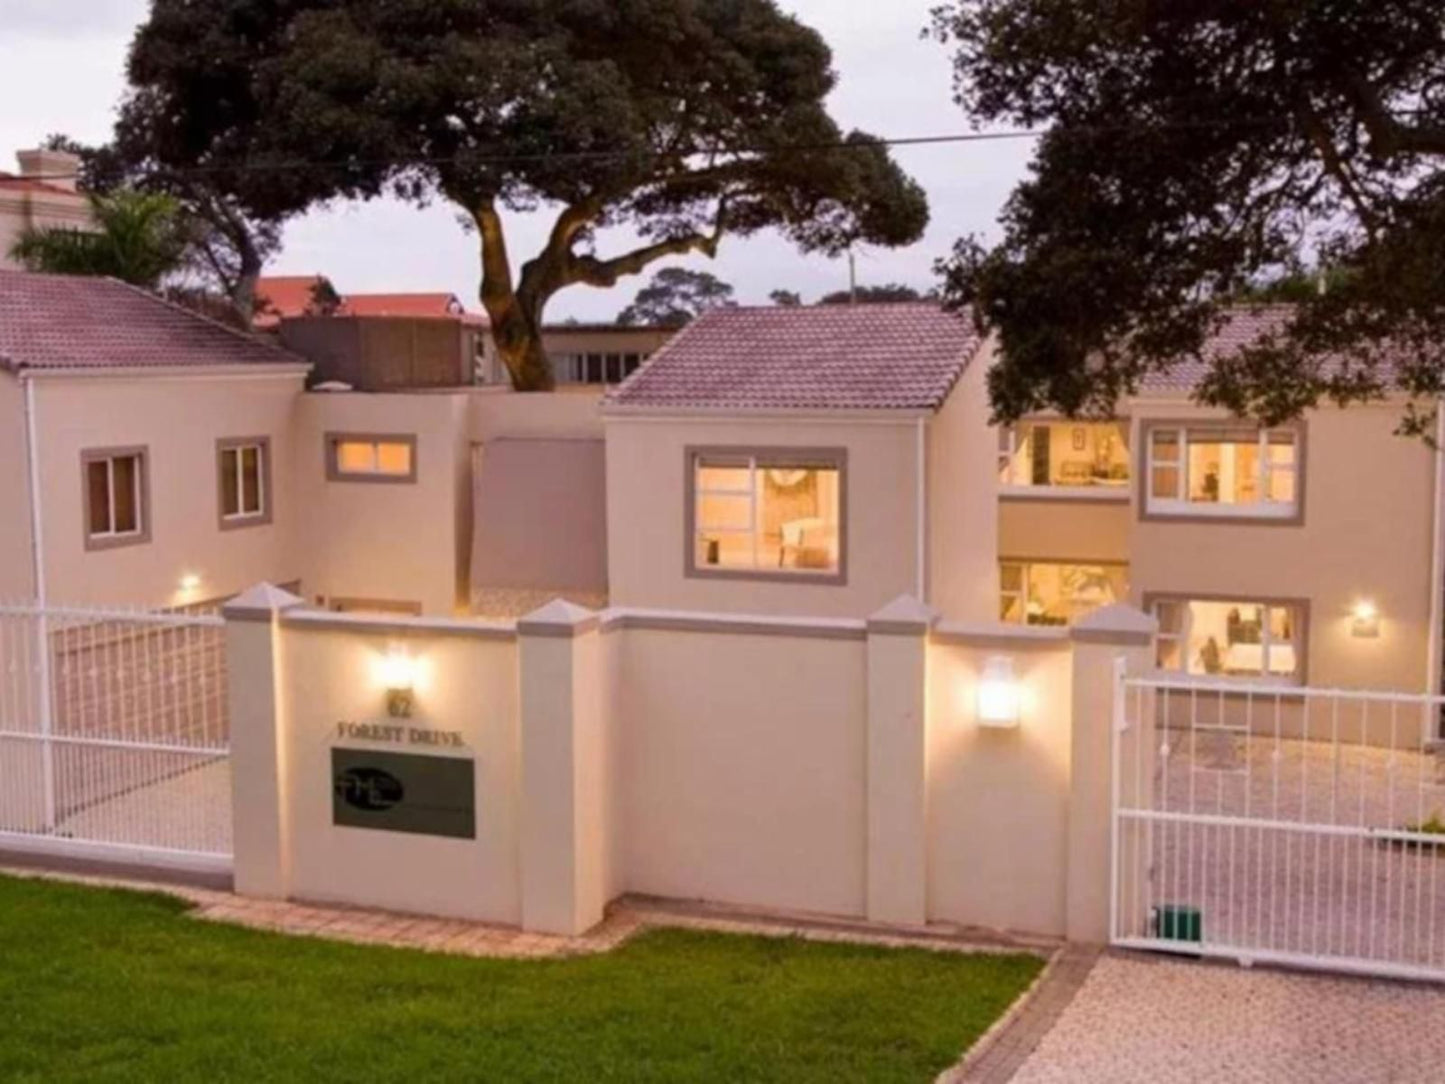 Forest Manor Boutique Guest House La Lucia Umhlanga Kwazulu Natal South Africa House, Building, Architecture